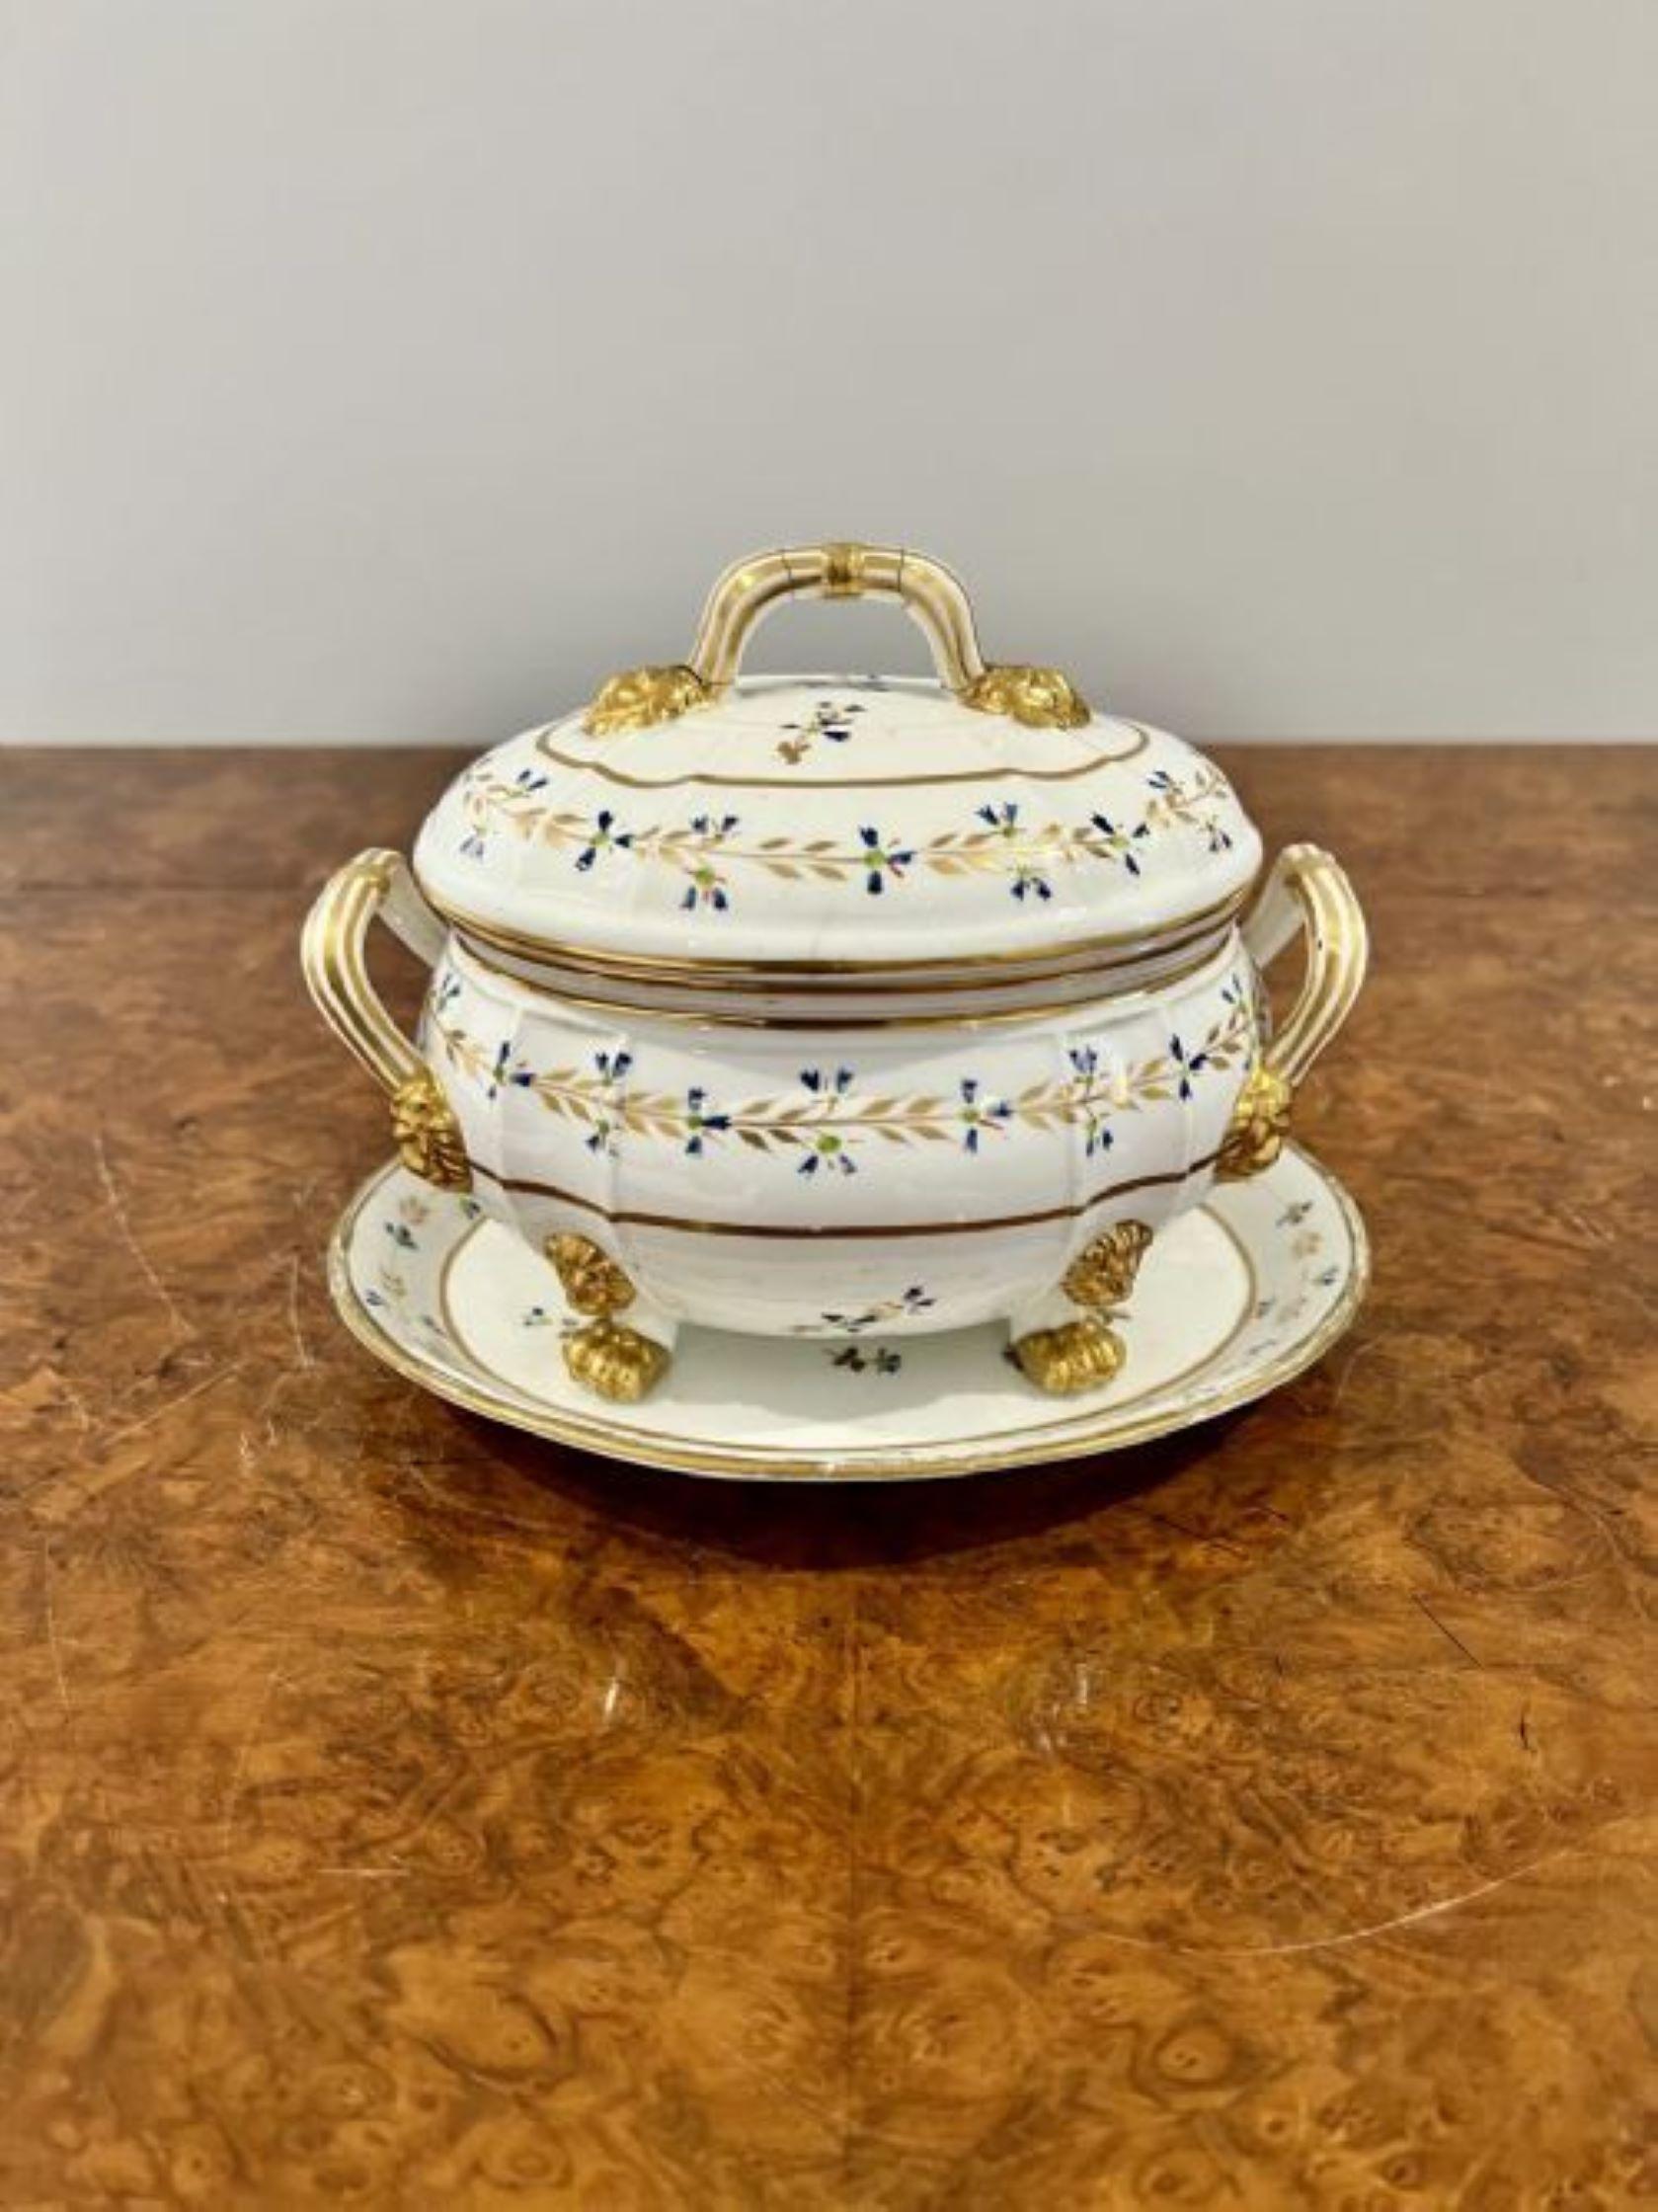 Ceramic Outstanding quality early 19th century crown derby tureen and cover For Sale